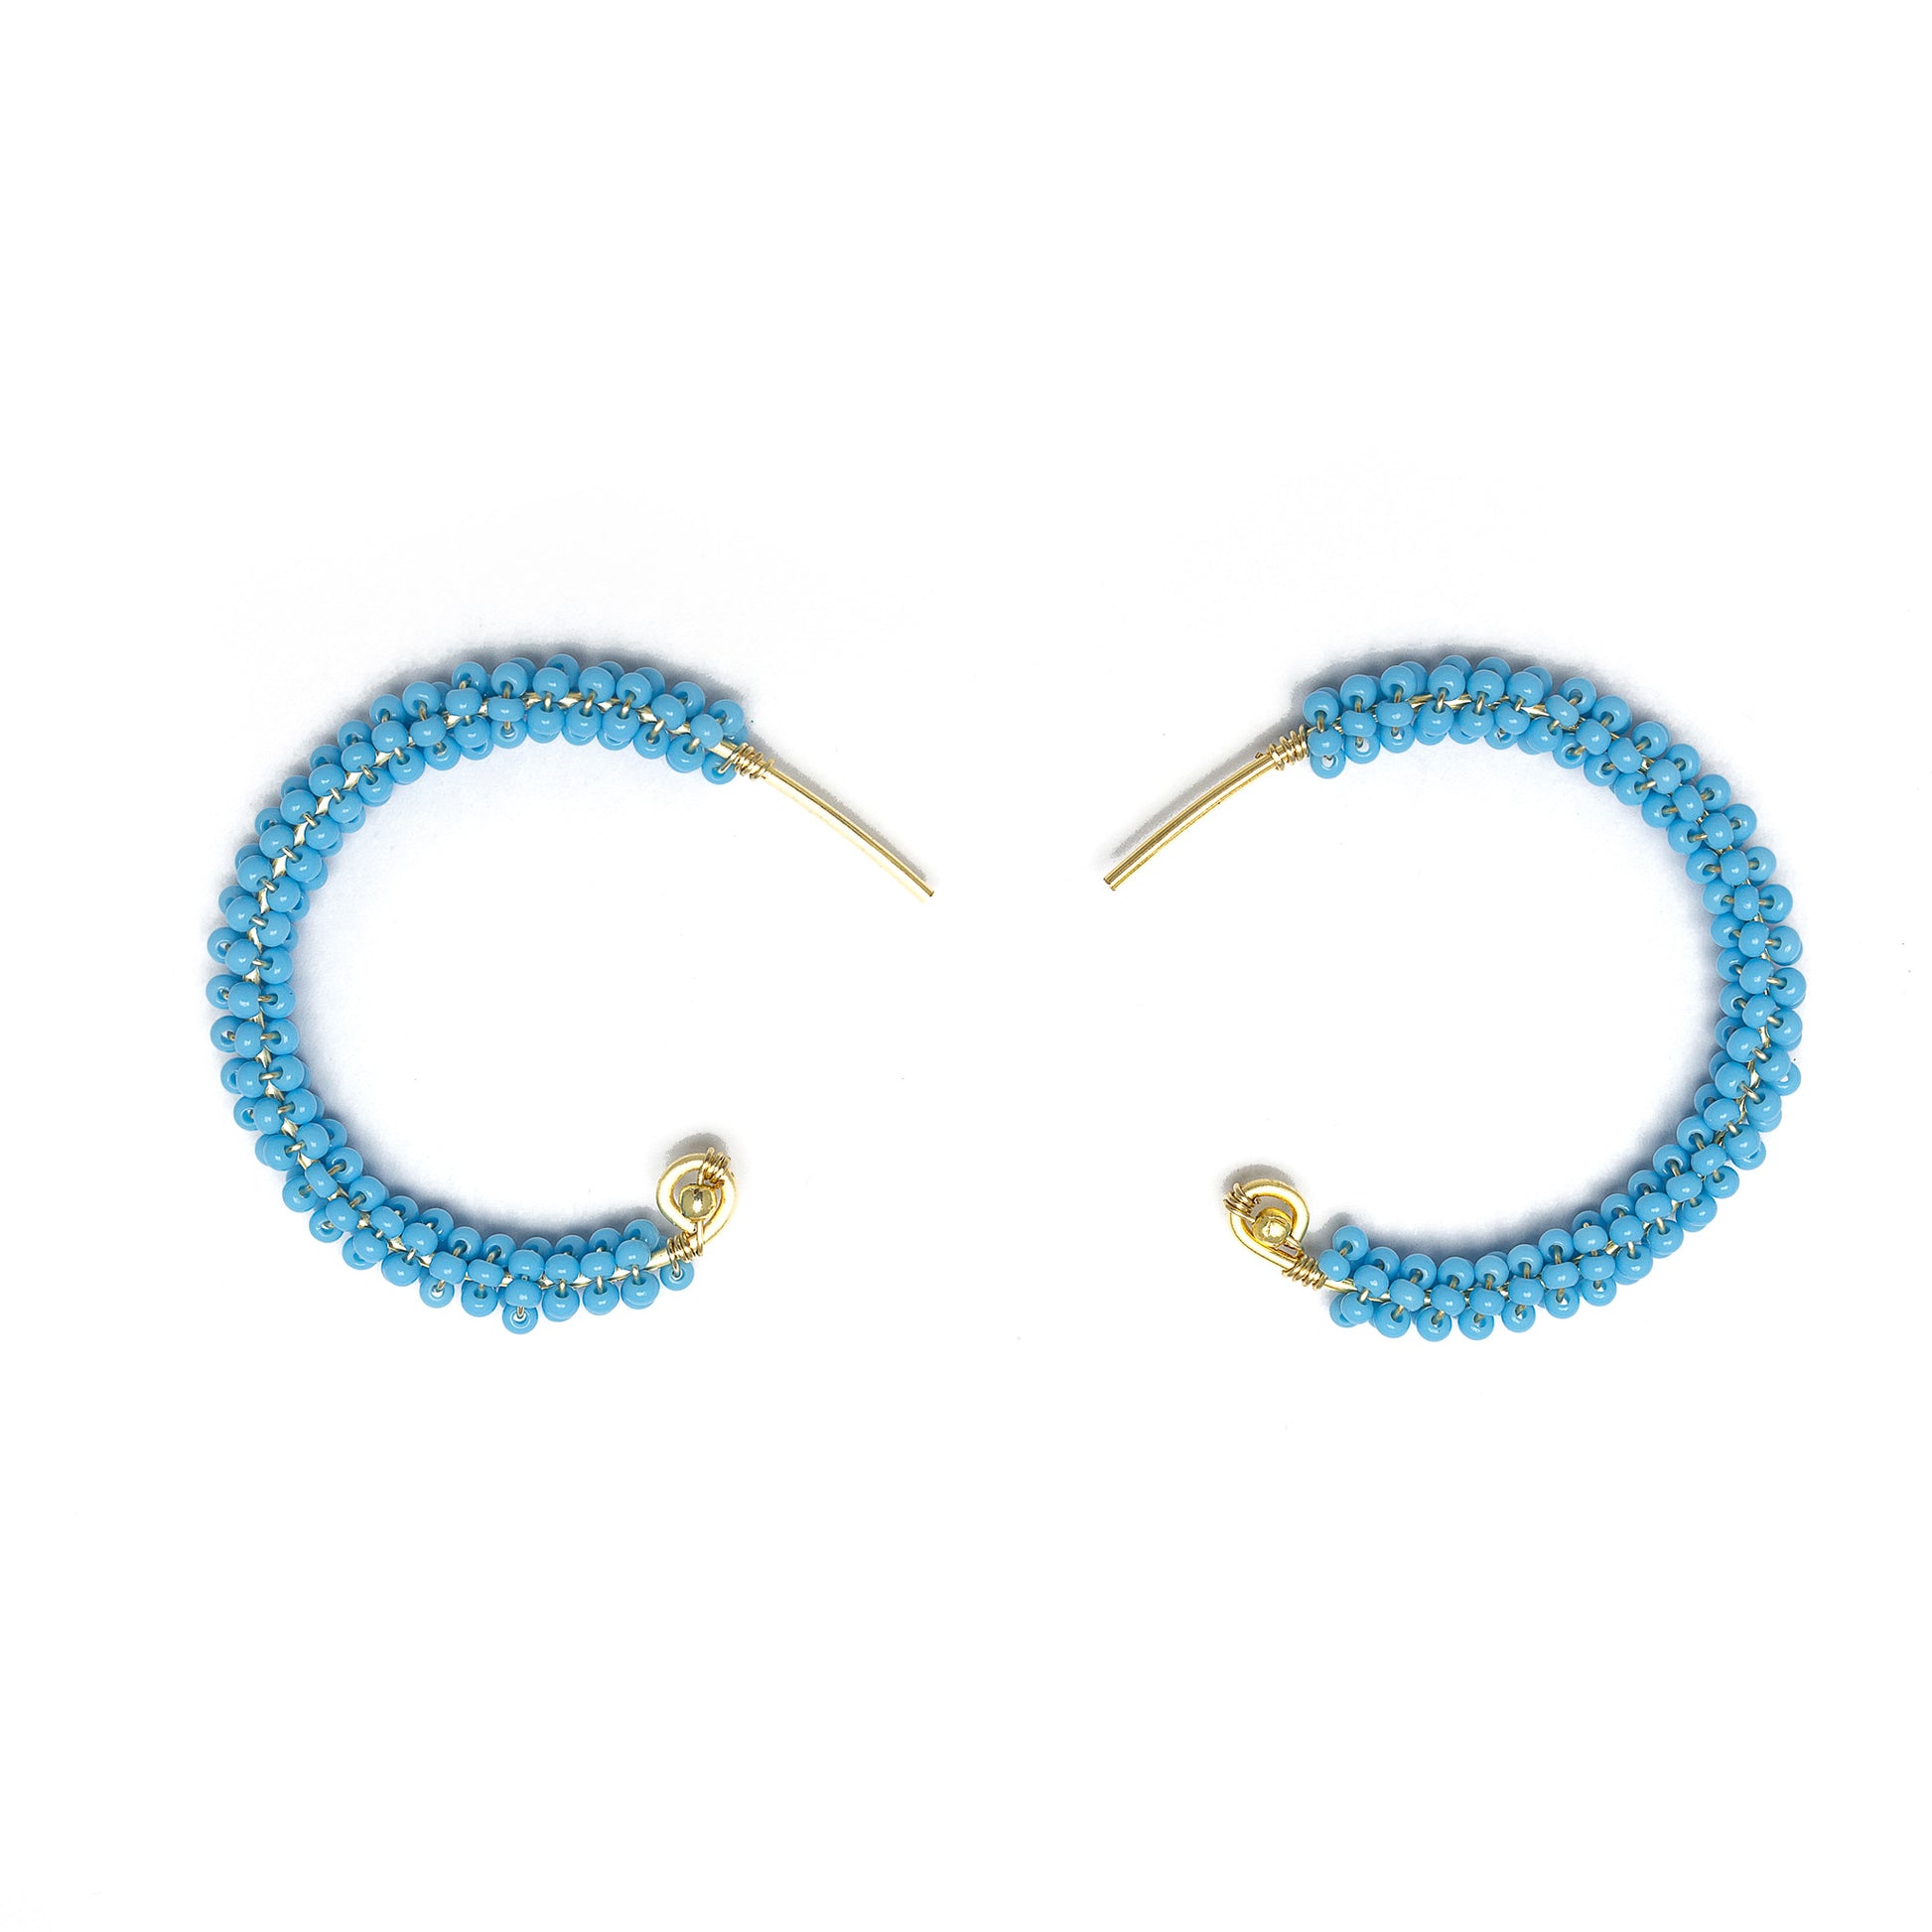 Florence gold Hoop Earrings are 1.5 inches long, Gold and Baby Blue Earrings. Wire Wrapped Earrings. Lightweight and comfortable earrings. Handmade for women. Open hoop earrings.